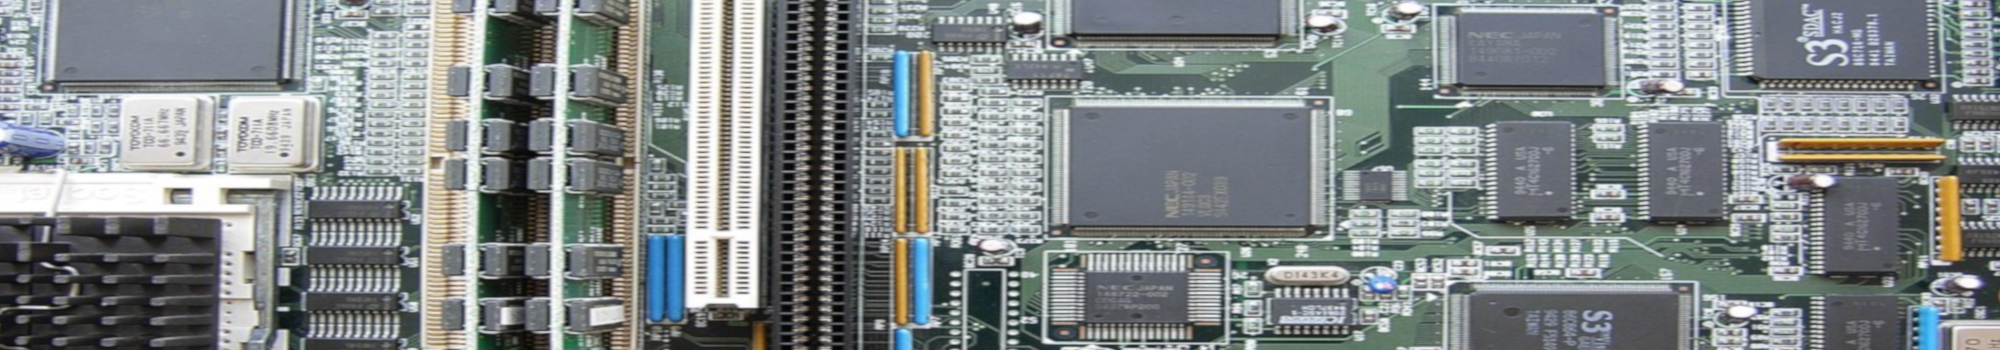 Detail view of a motherboard